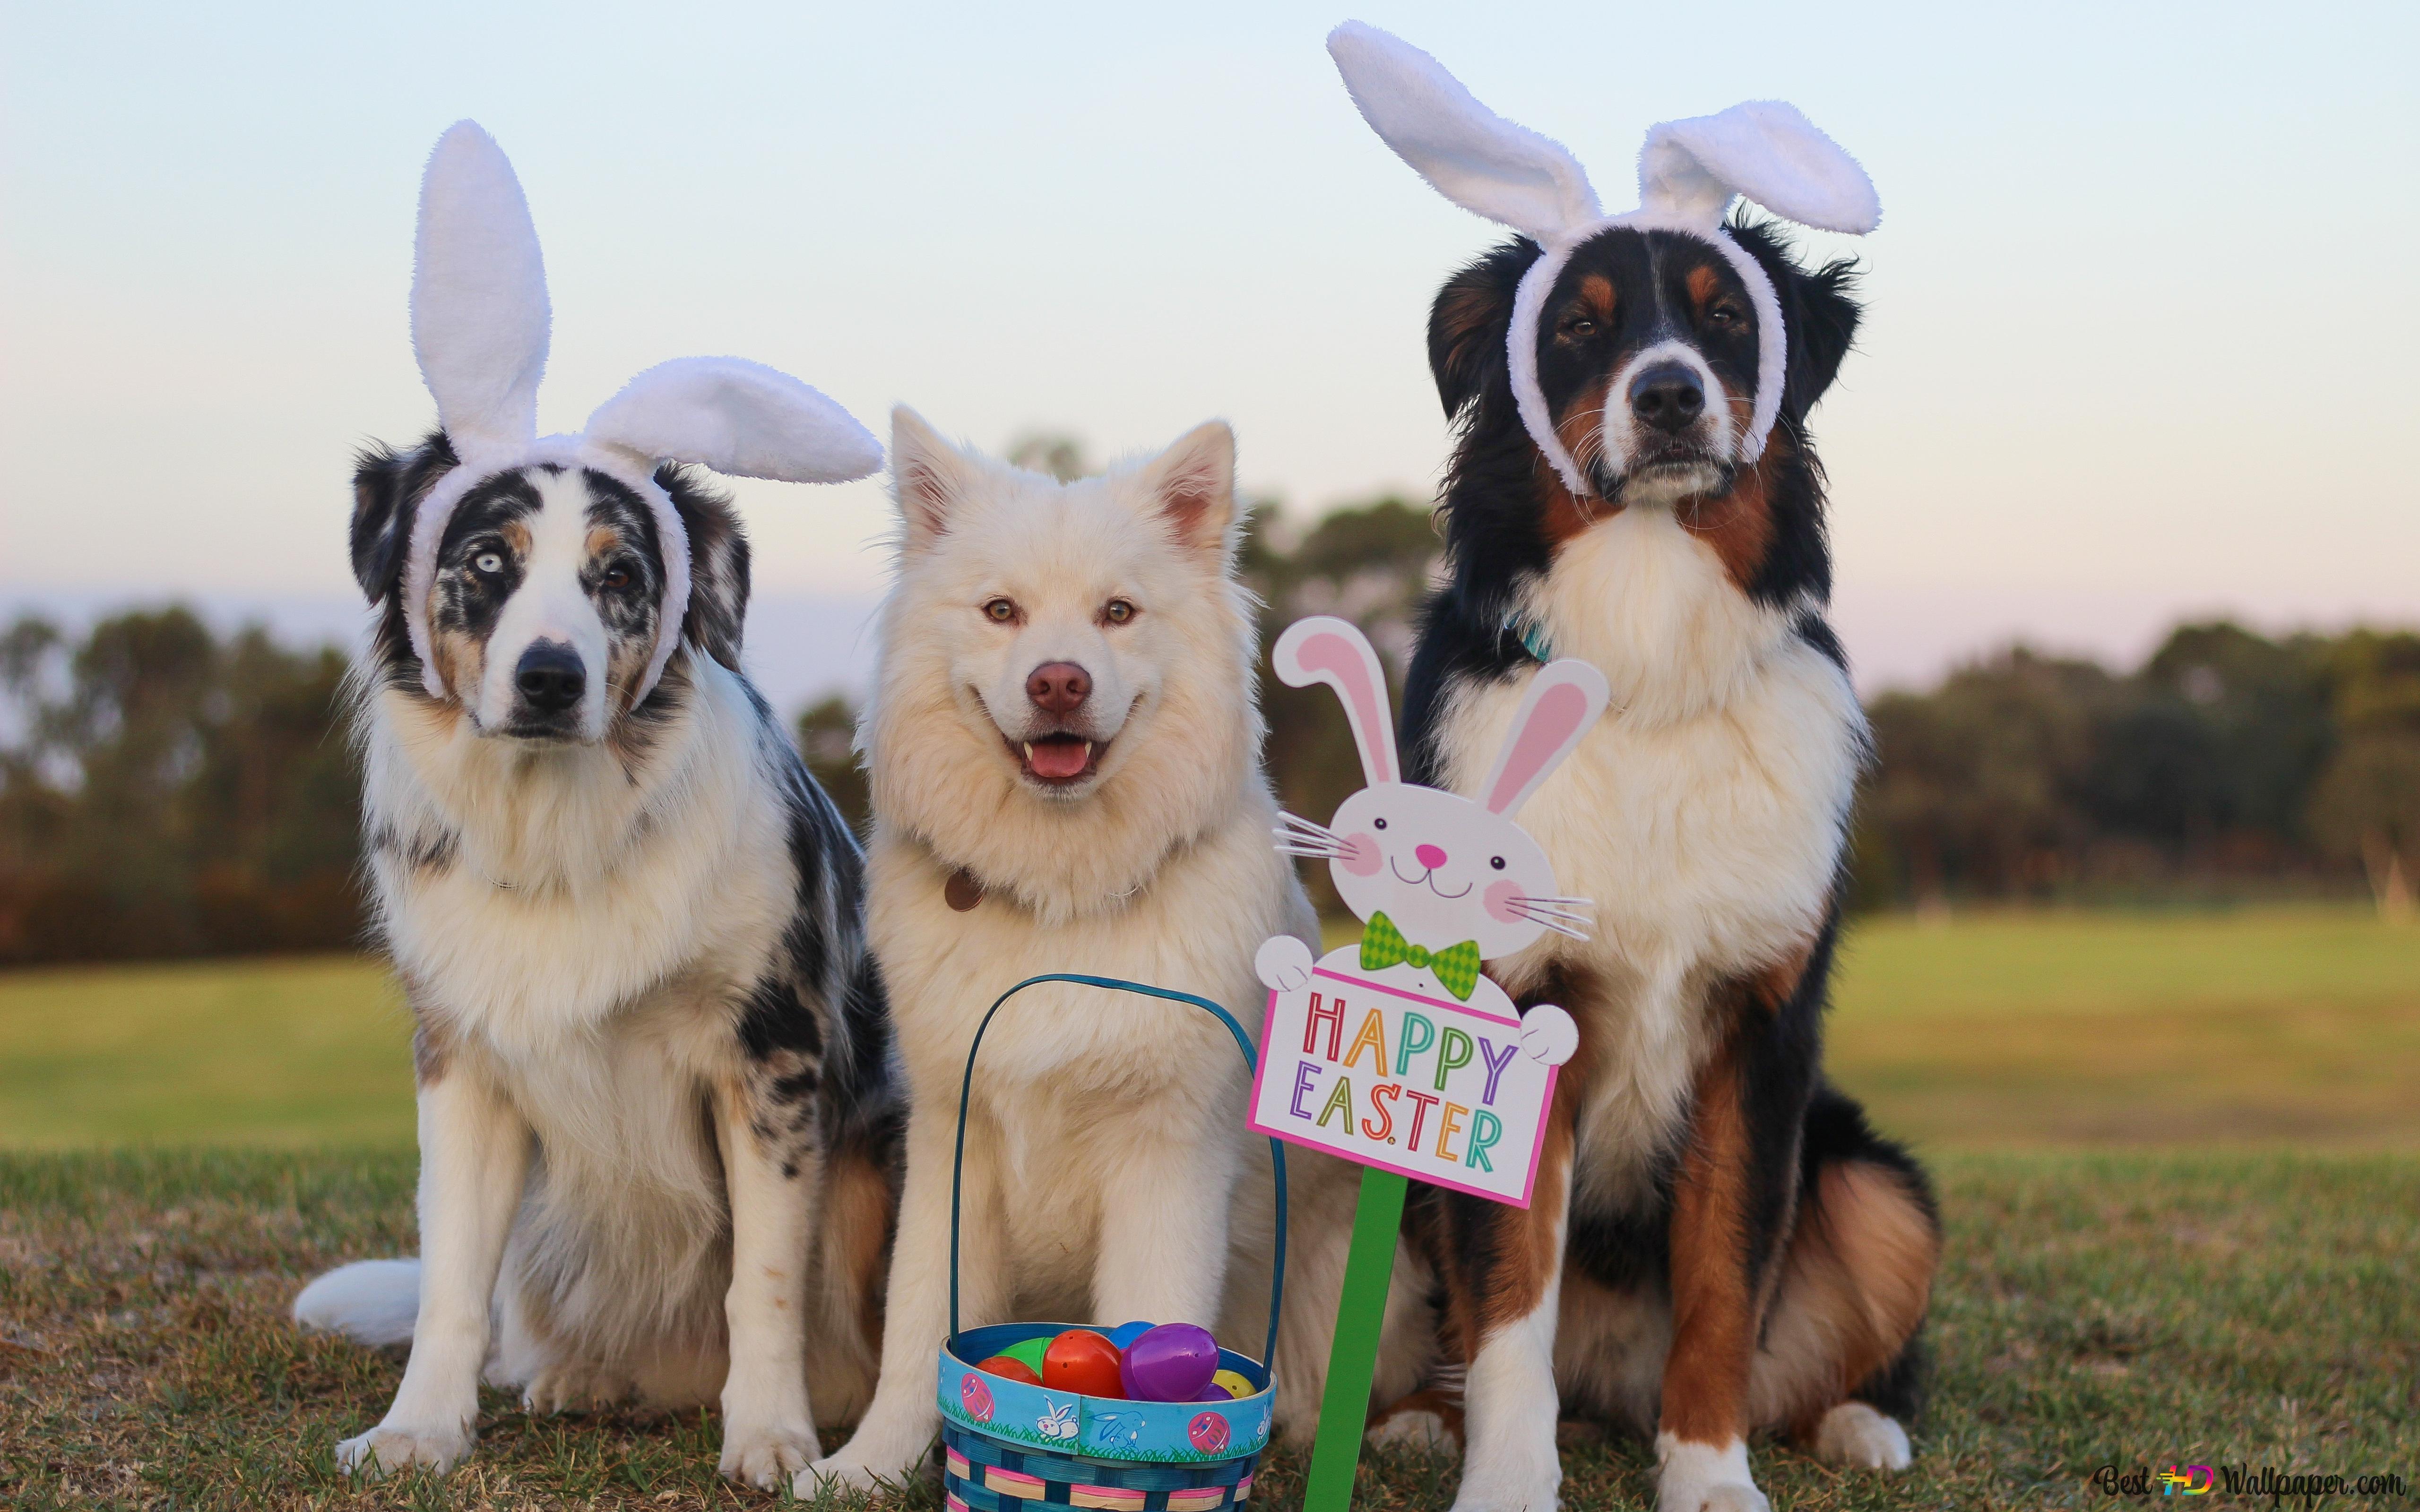 Pet dogs with bunny ears Easter egg hunt 4K wallpaper download